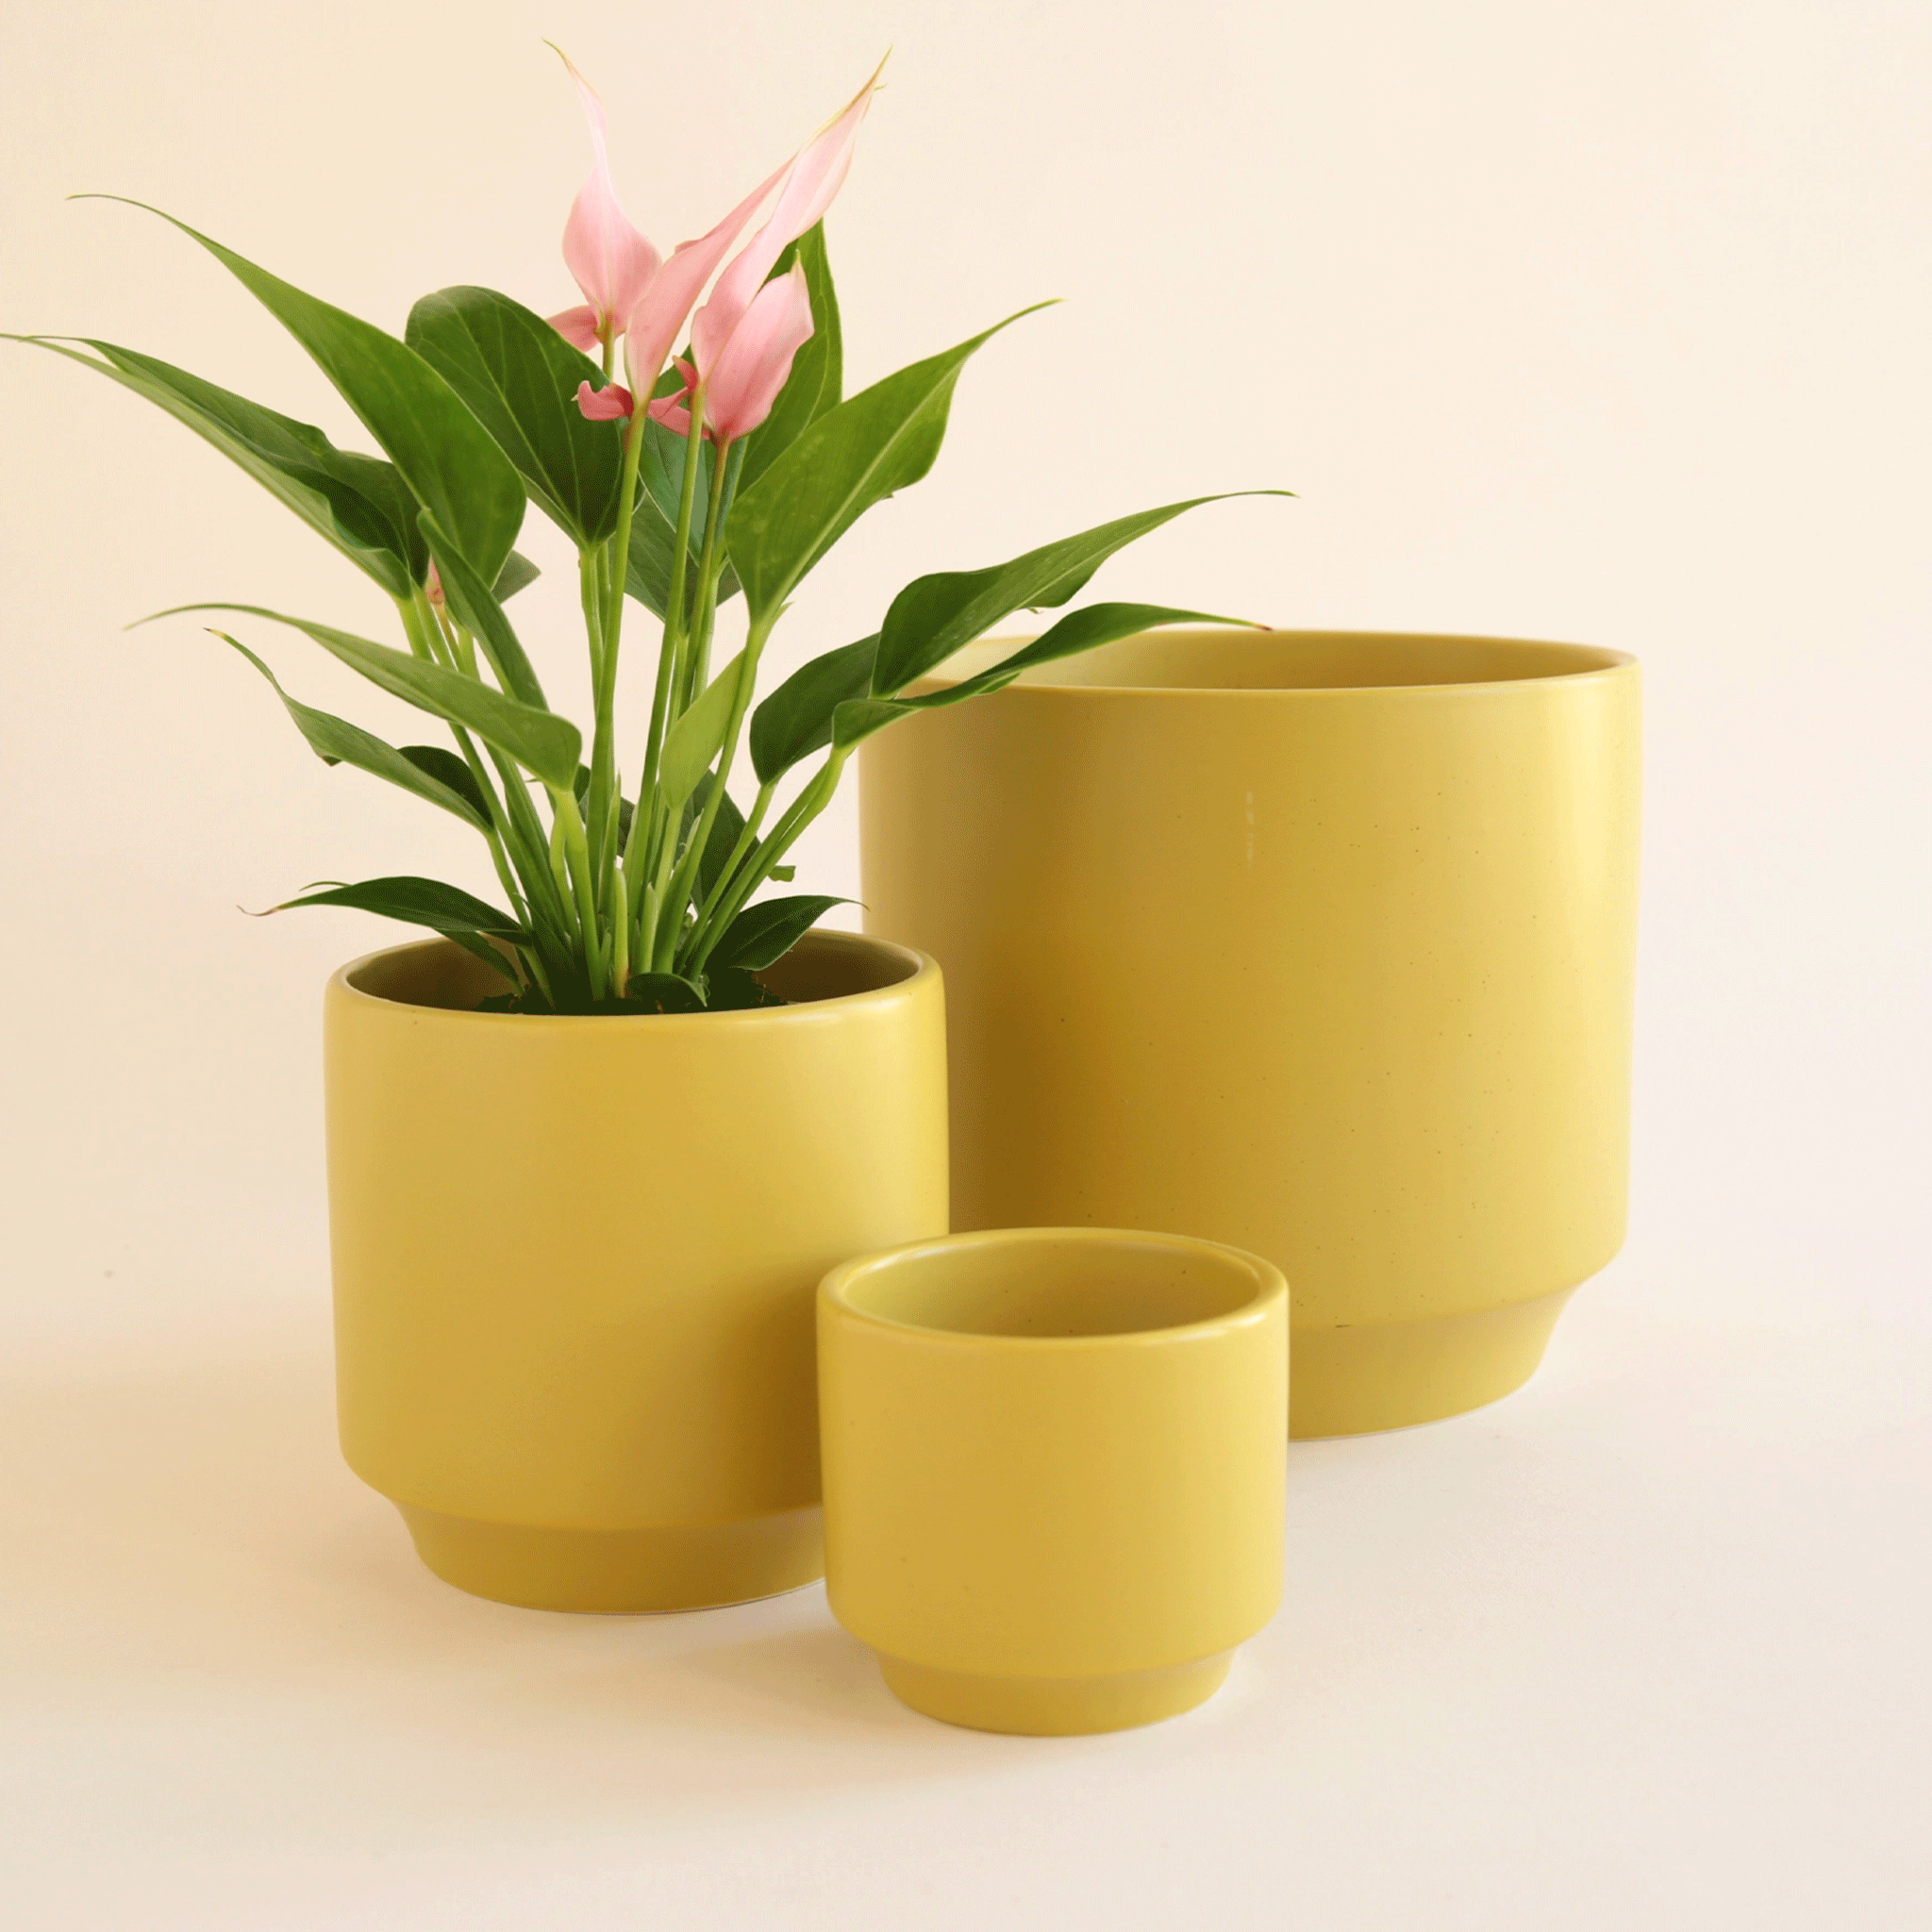 On an ivory background is three different sized ceramic planters in chartreuse shade with a slight speckle detail and a tapered base.